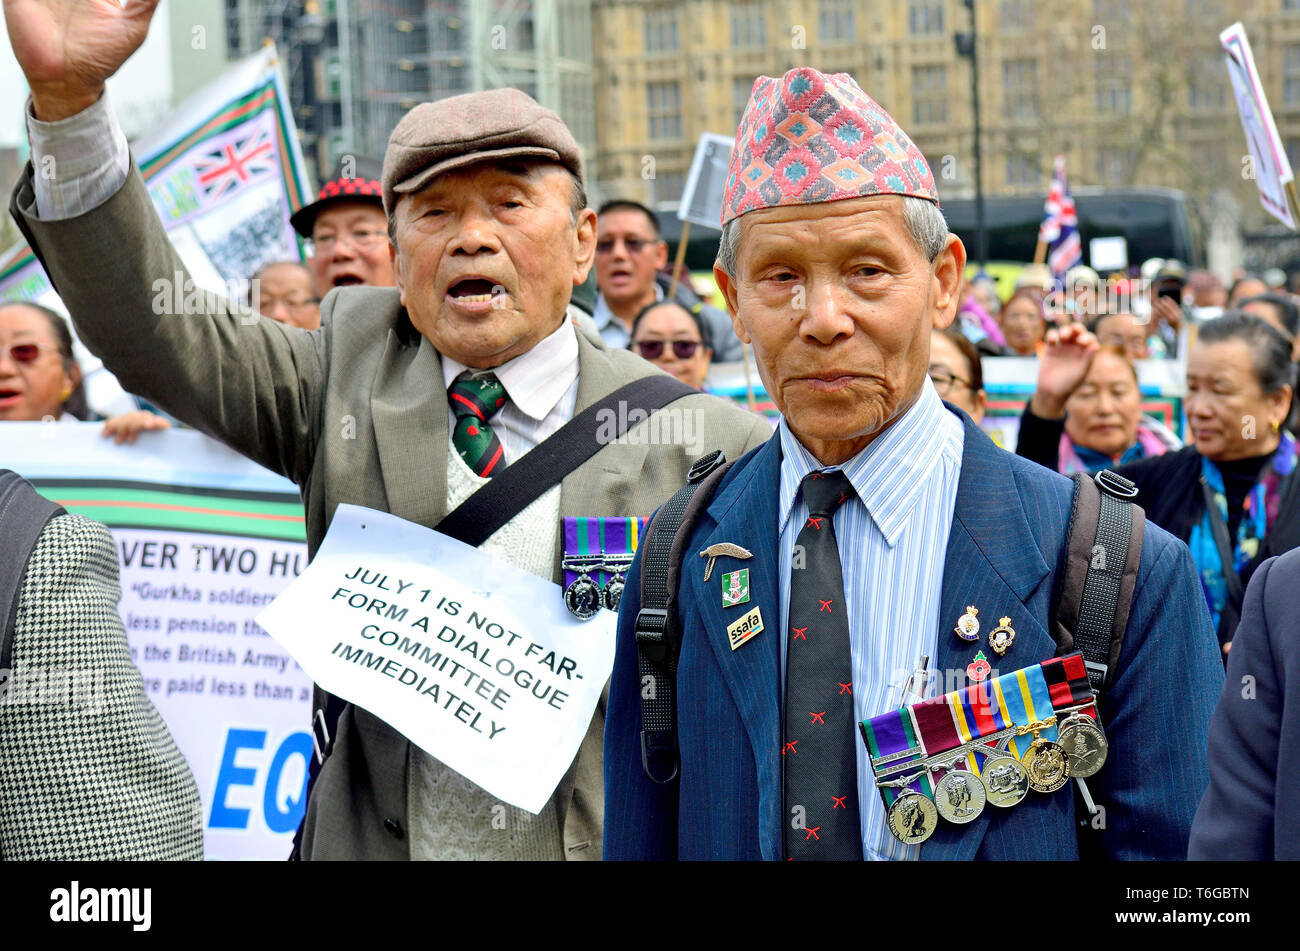 London, UK. 1st May 2019. Gurkha veterans march to Parliament Square demanding equal rights with British and Commonwealth soldiers Credit: PjrFoto/Alamy Live News Stock Photo